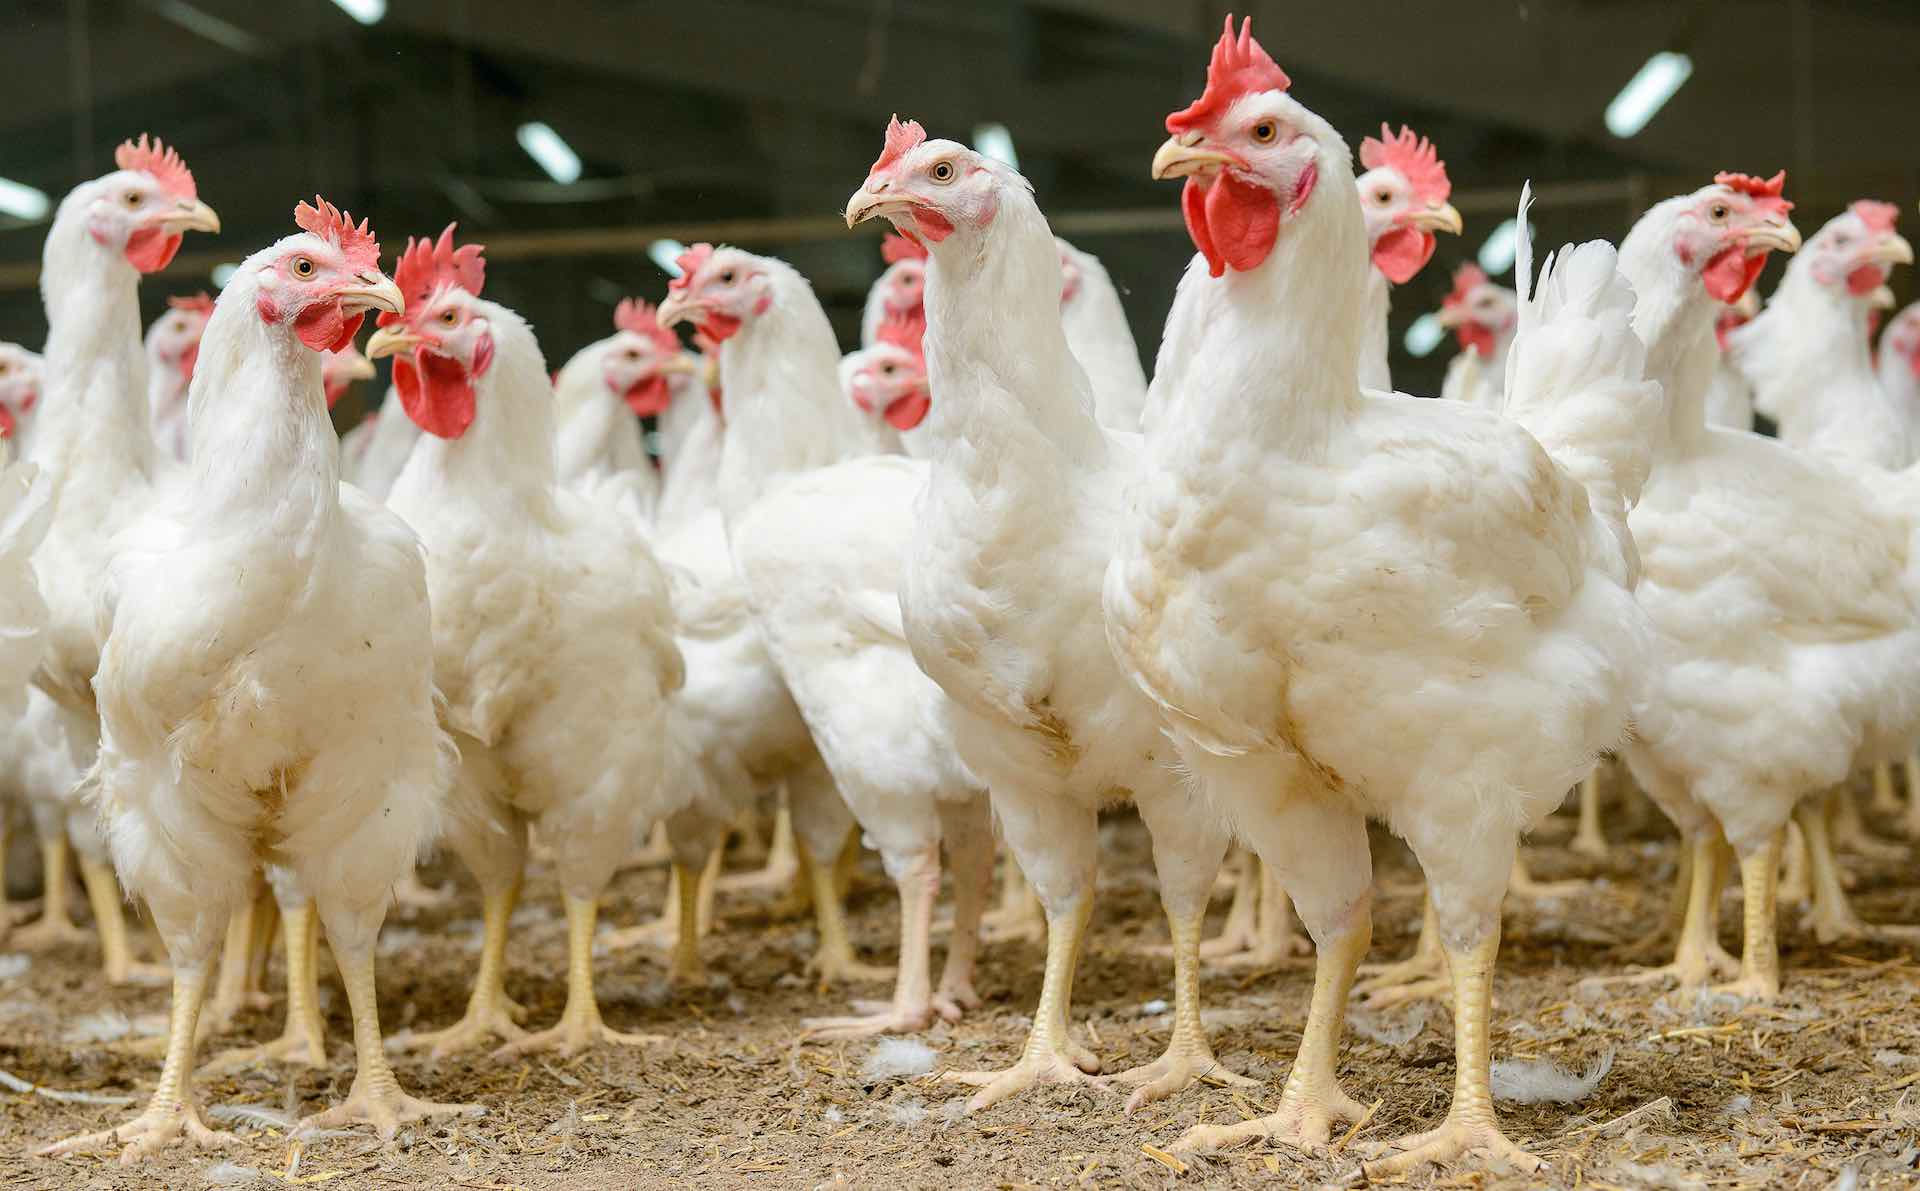 Bird flu outbreak reported on a small farm in South Africa Manama Mag